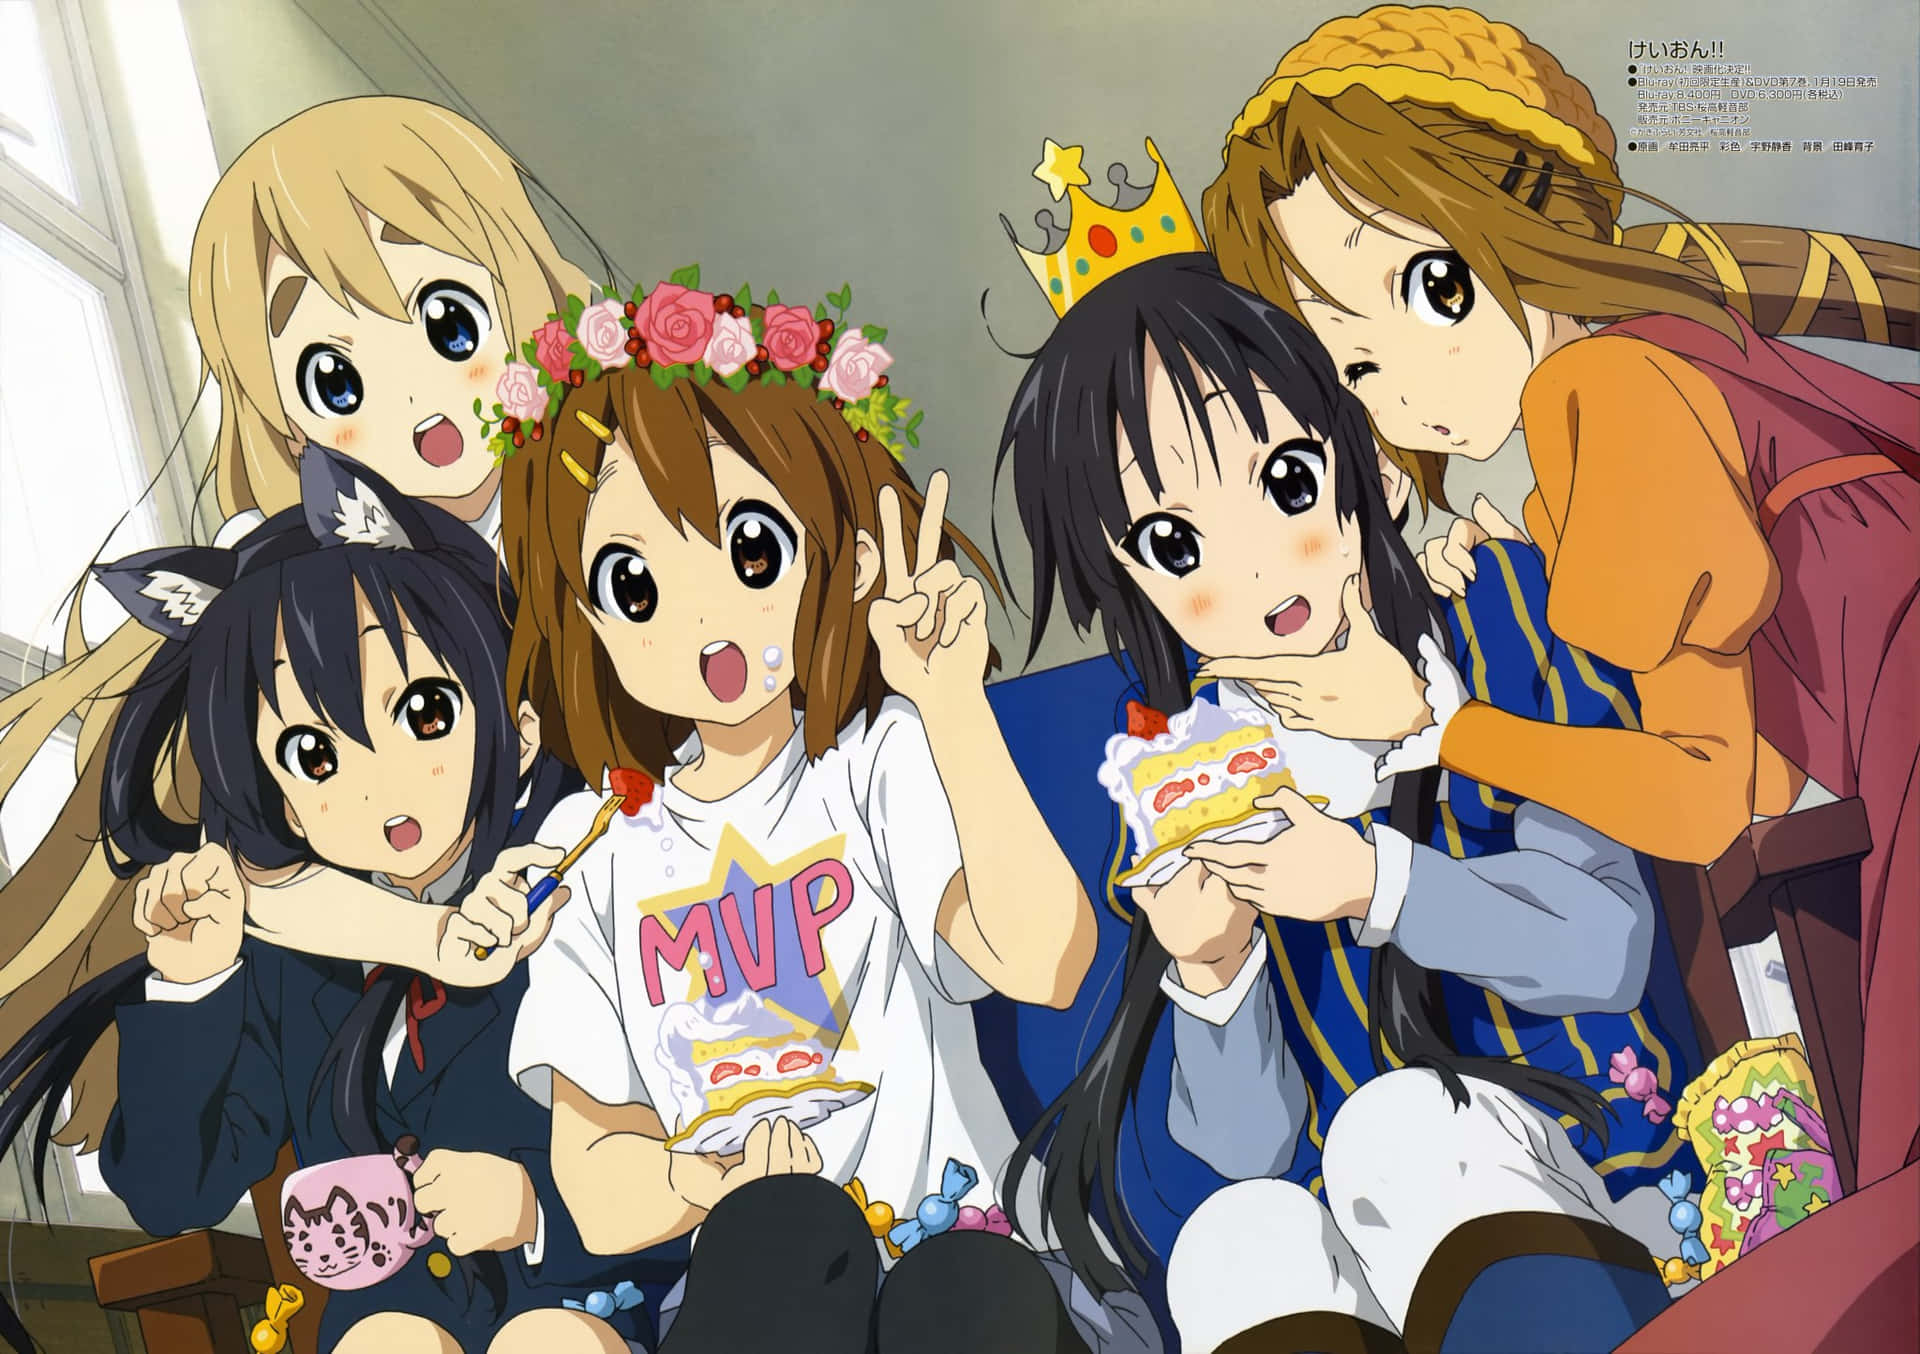 A Group Of Anime Girls Sitting On A Chair